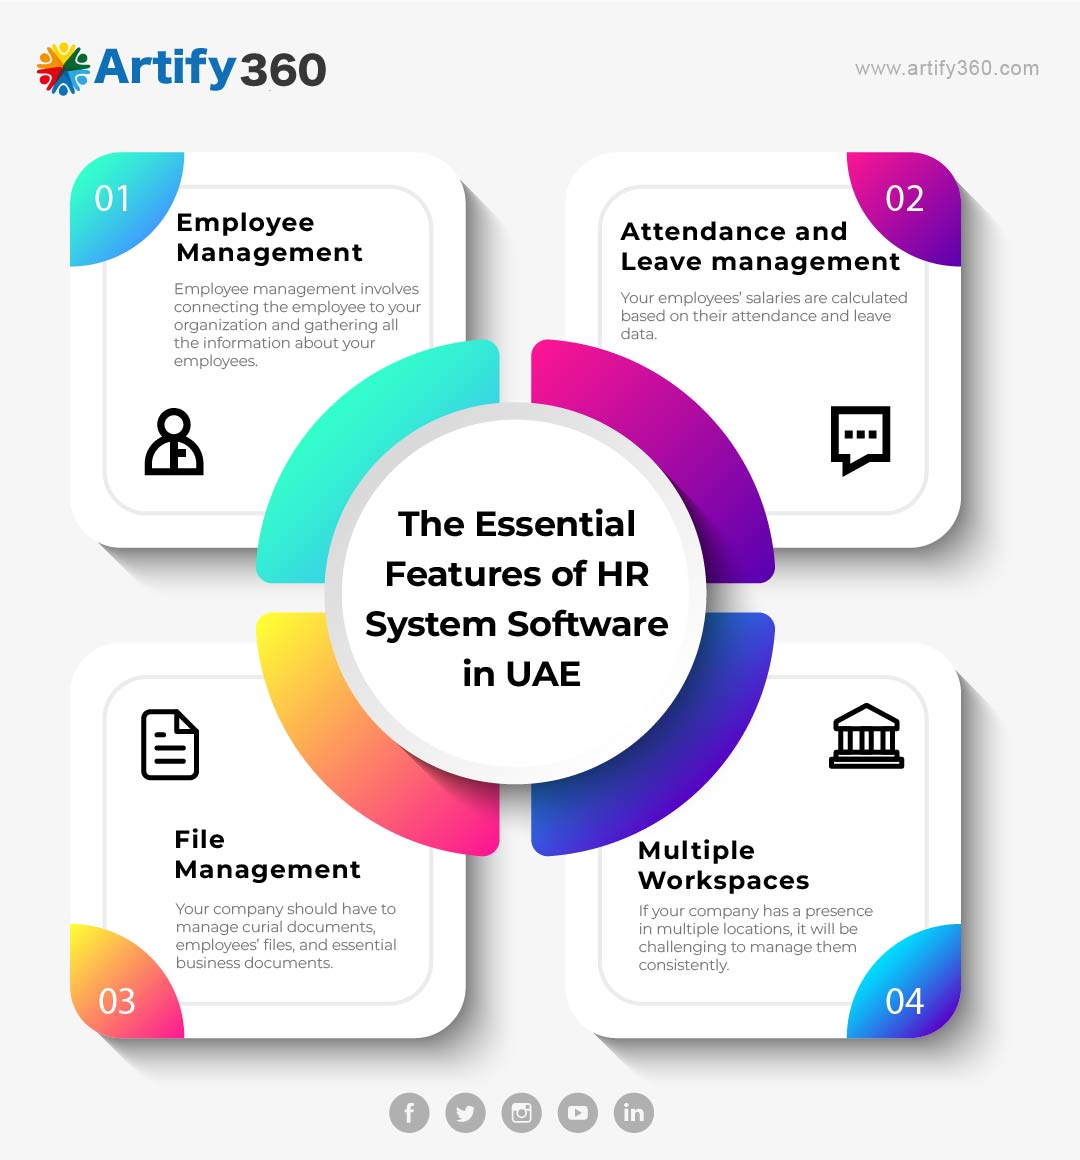 Automate Your HR Management With HR System Software in UAE